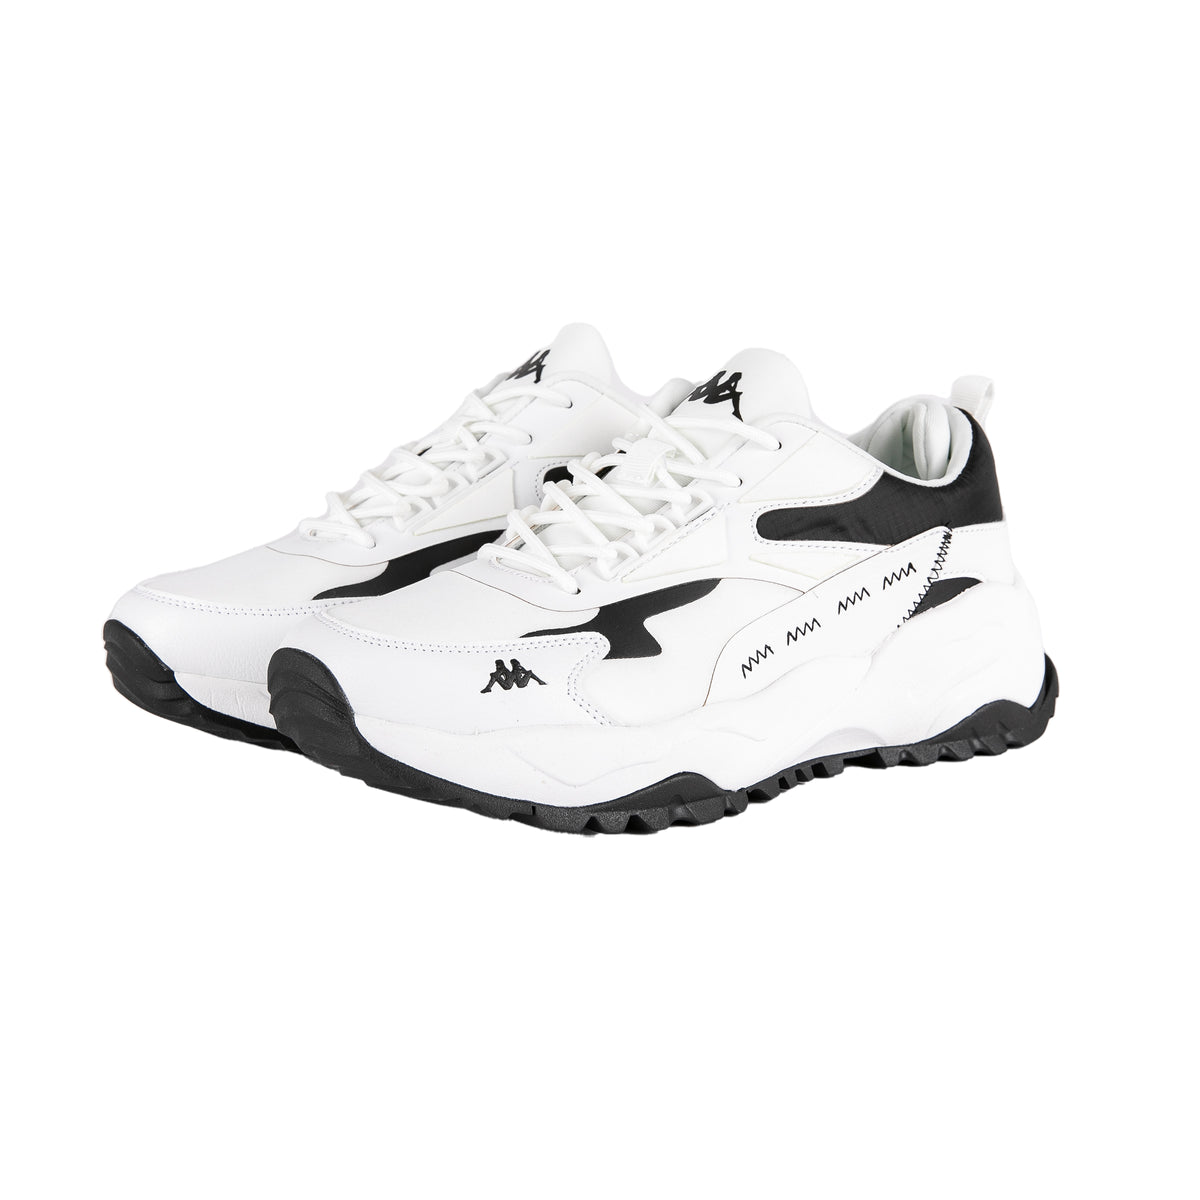 Shop online for Authentic Altin 3 Sneakers - White Black Kappa US